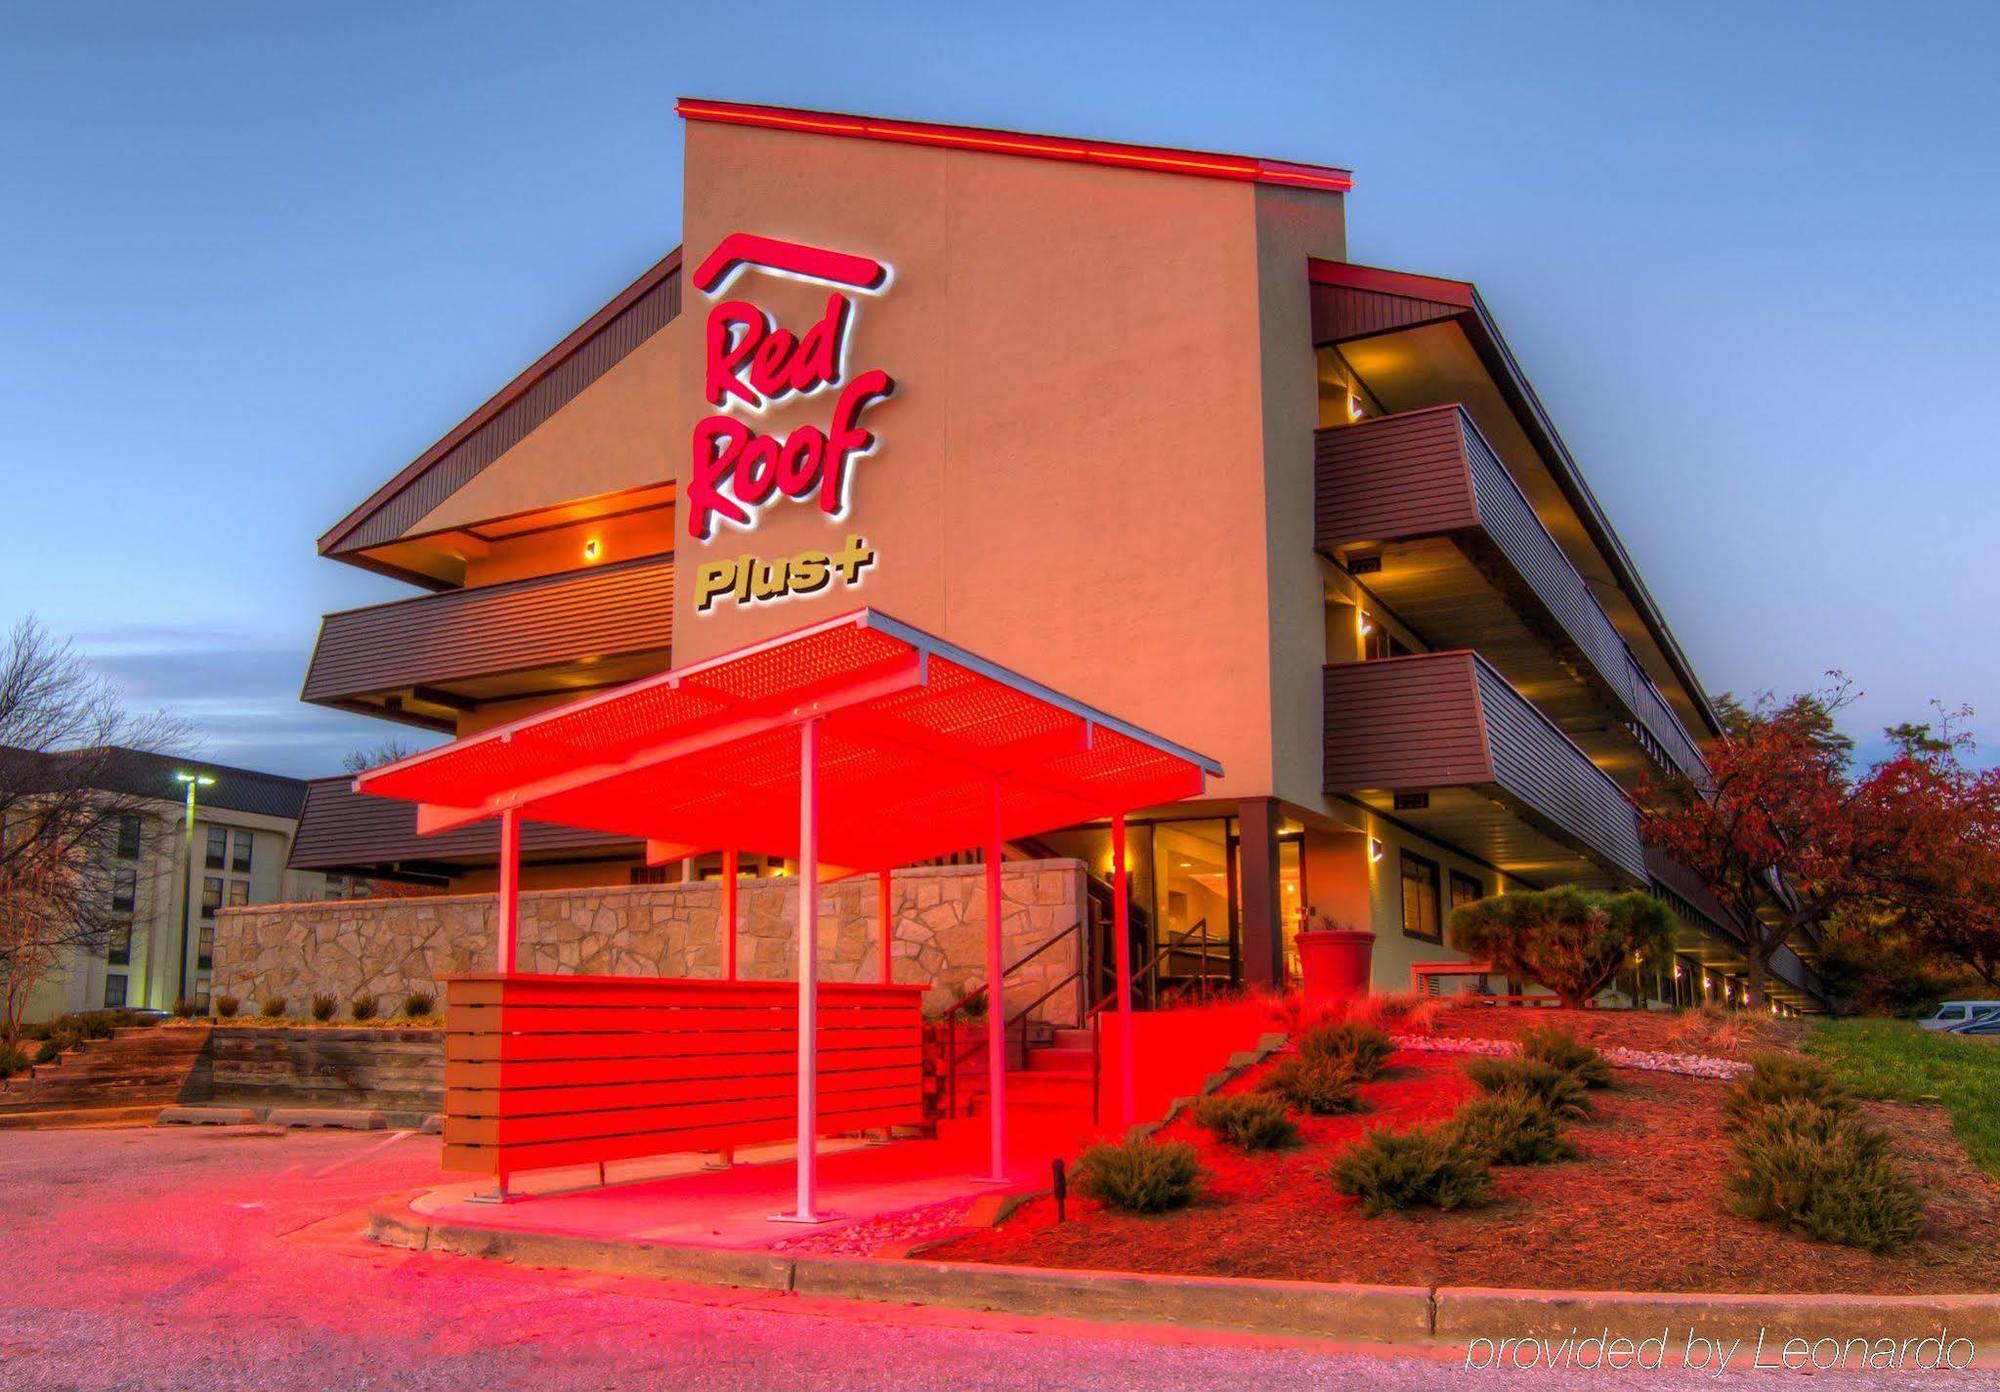 Red Roof Inn Plus+ Baltimore-Washington Dc/Bwi Airport Linthicum Exterior photo